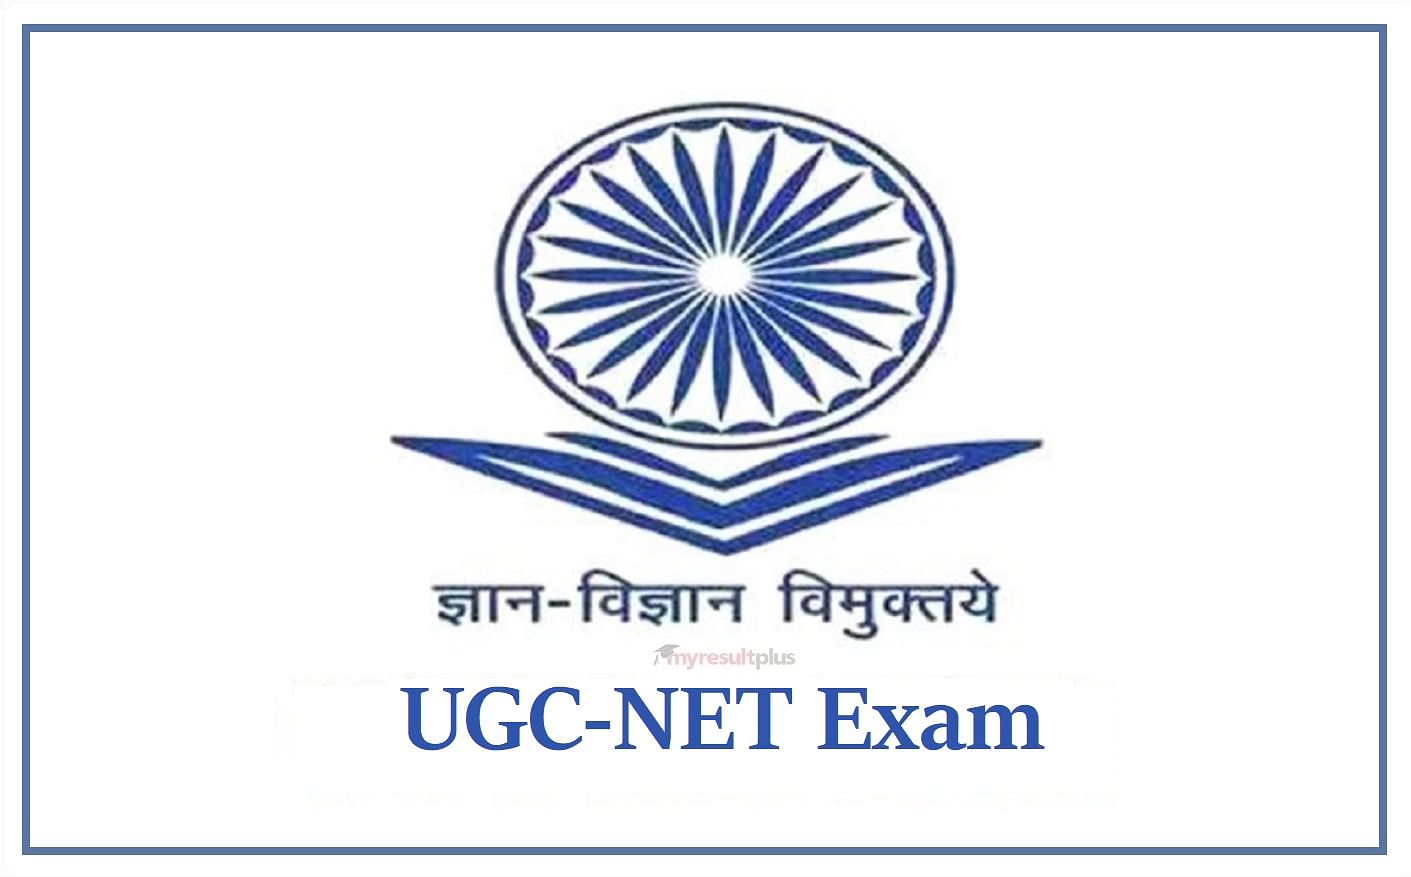 NTA UGC NET December 2021 and June 2022 Examination Dates Released, Exams to be Held in Two Stages